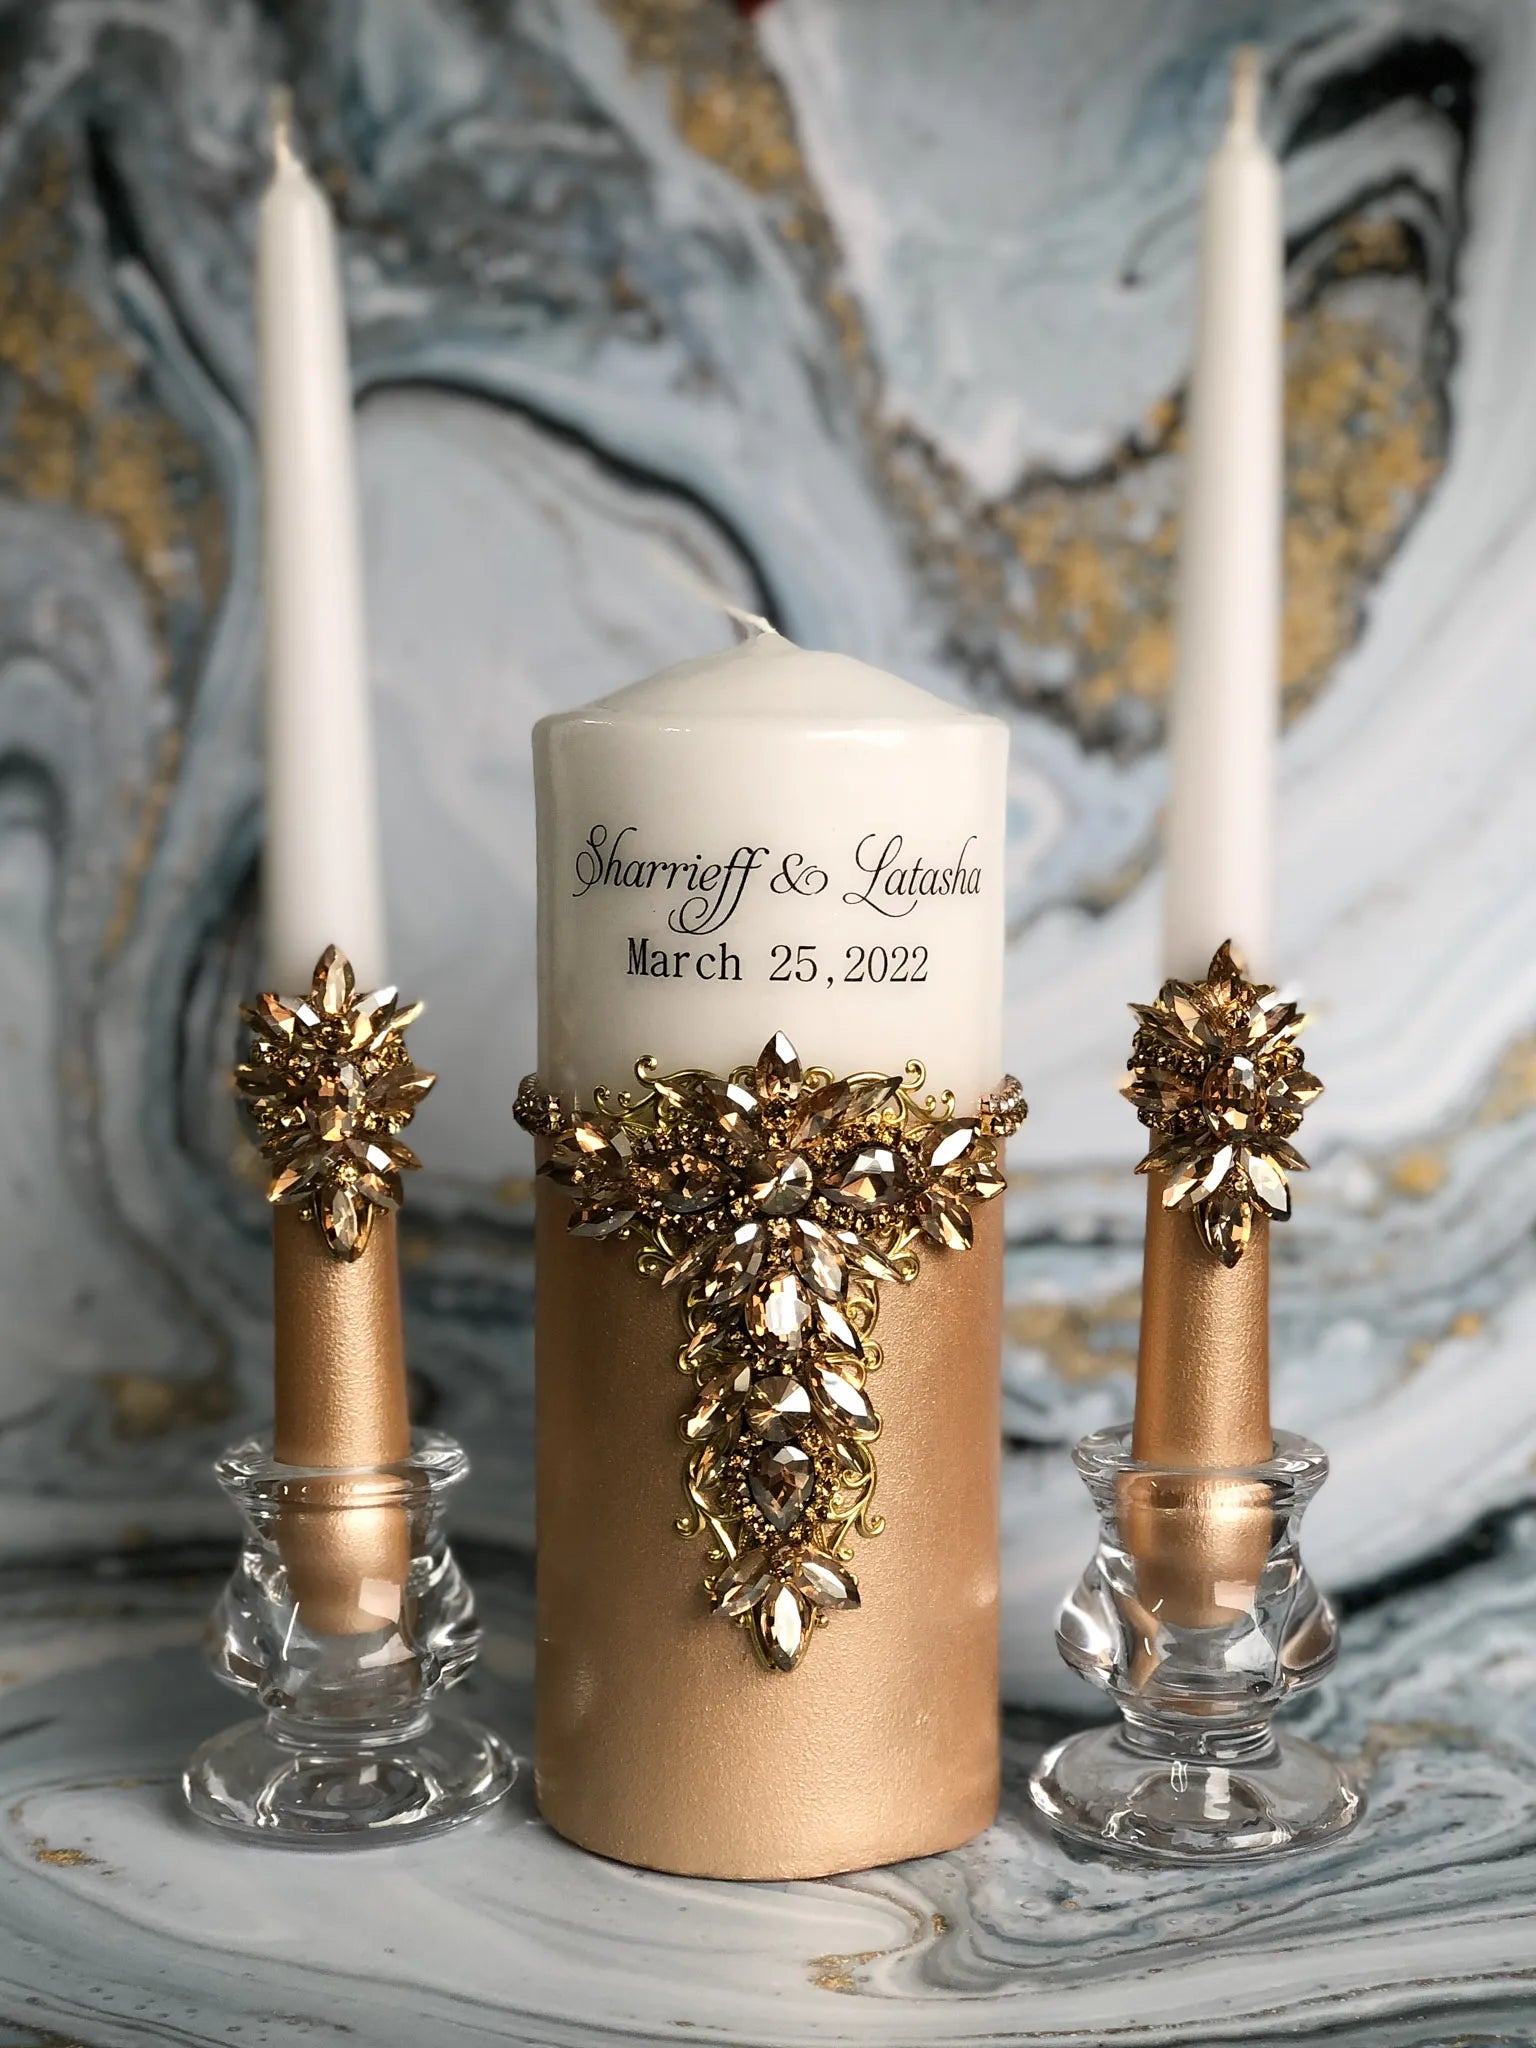 Personalized gold crystal unity candles with names and date